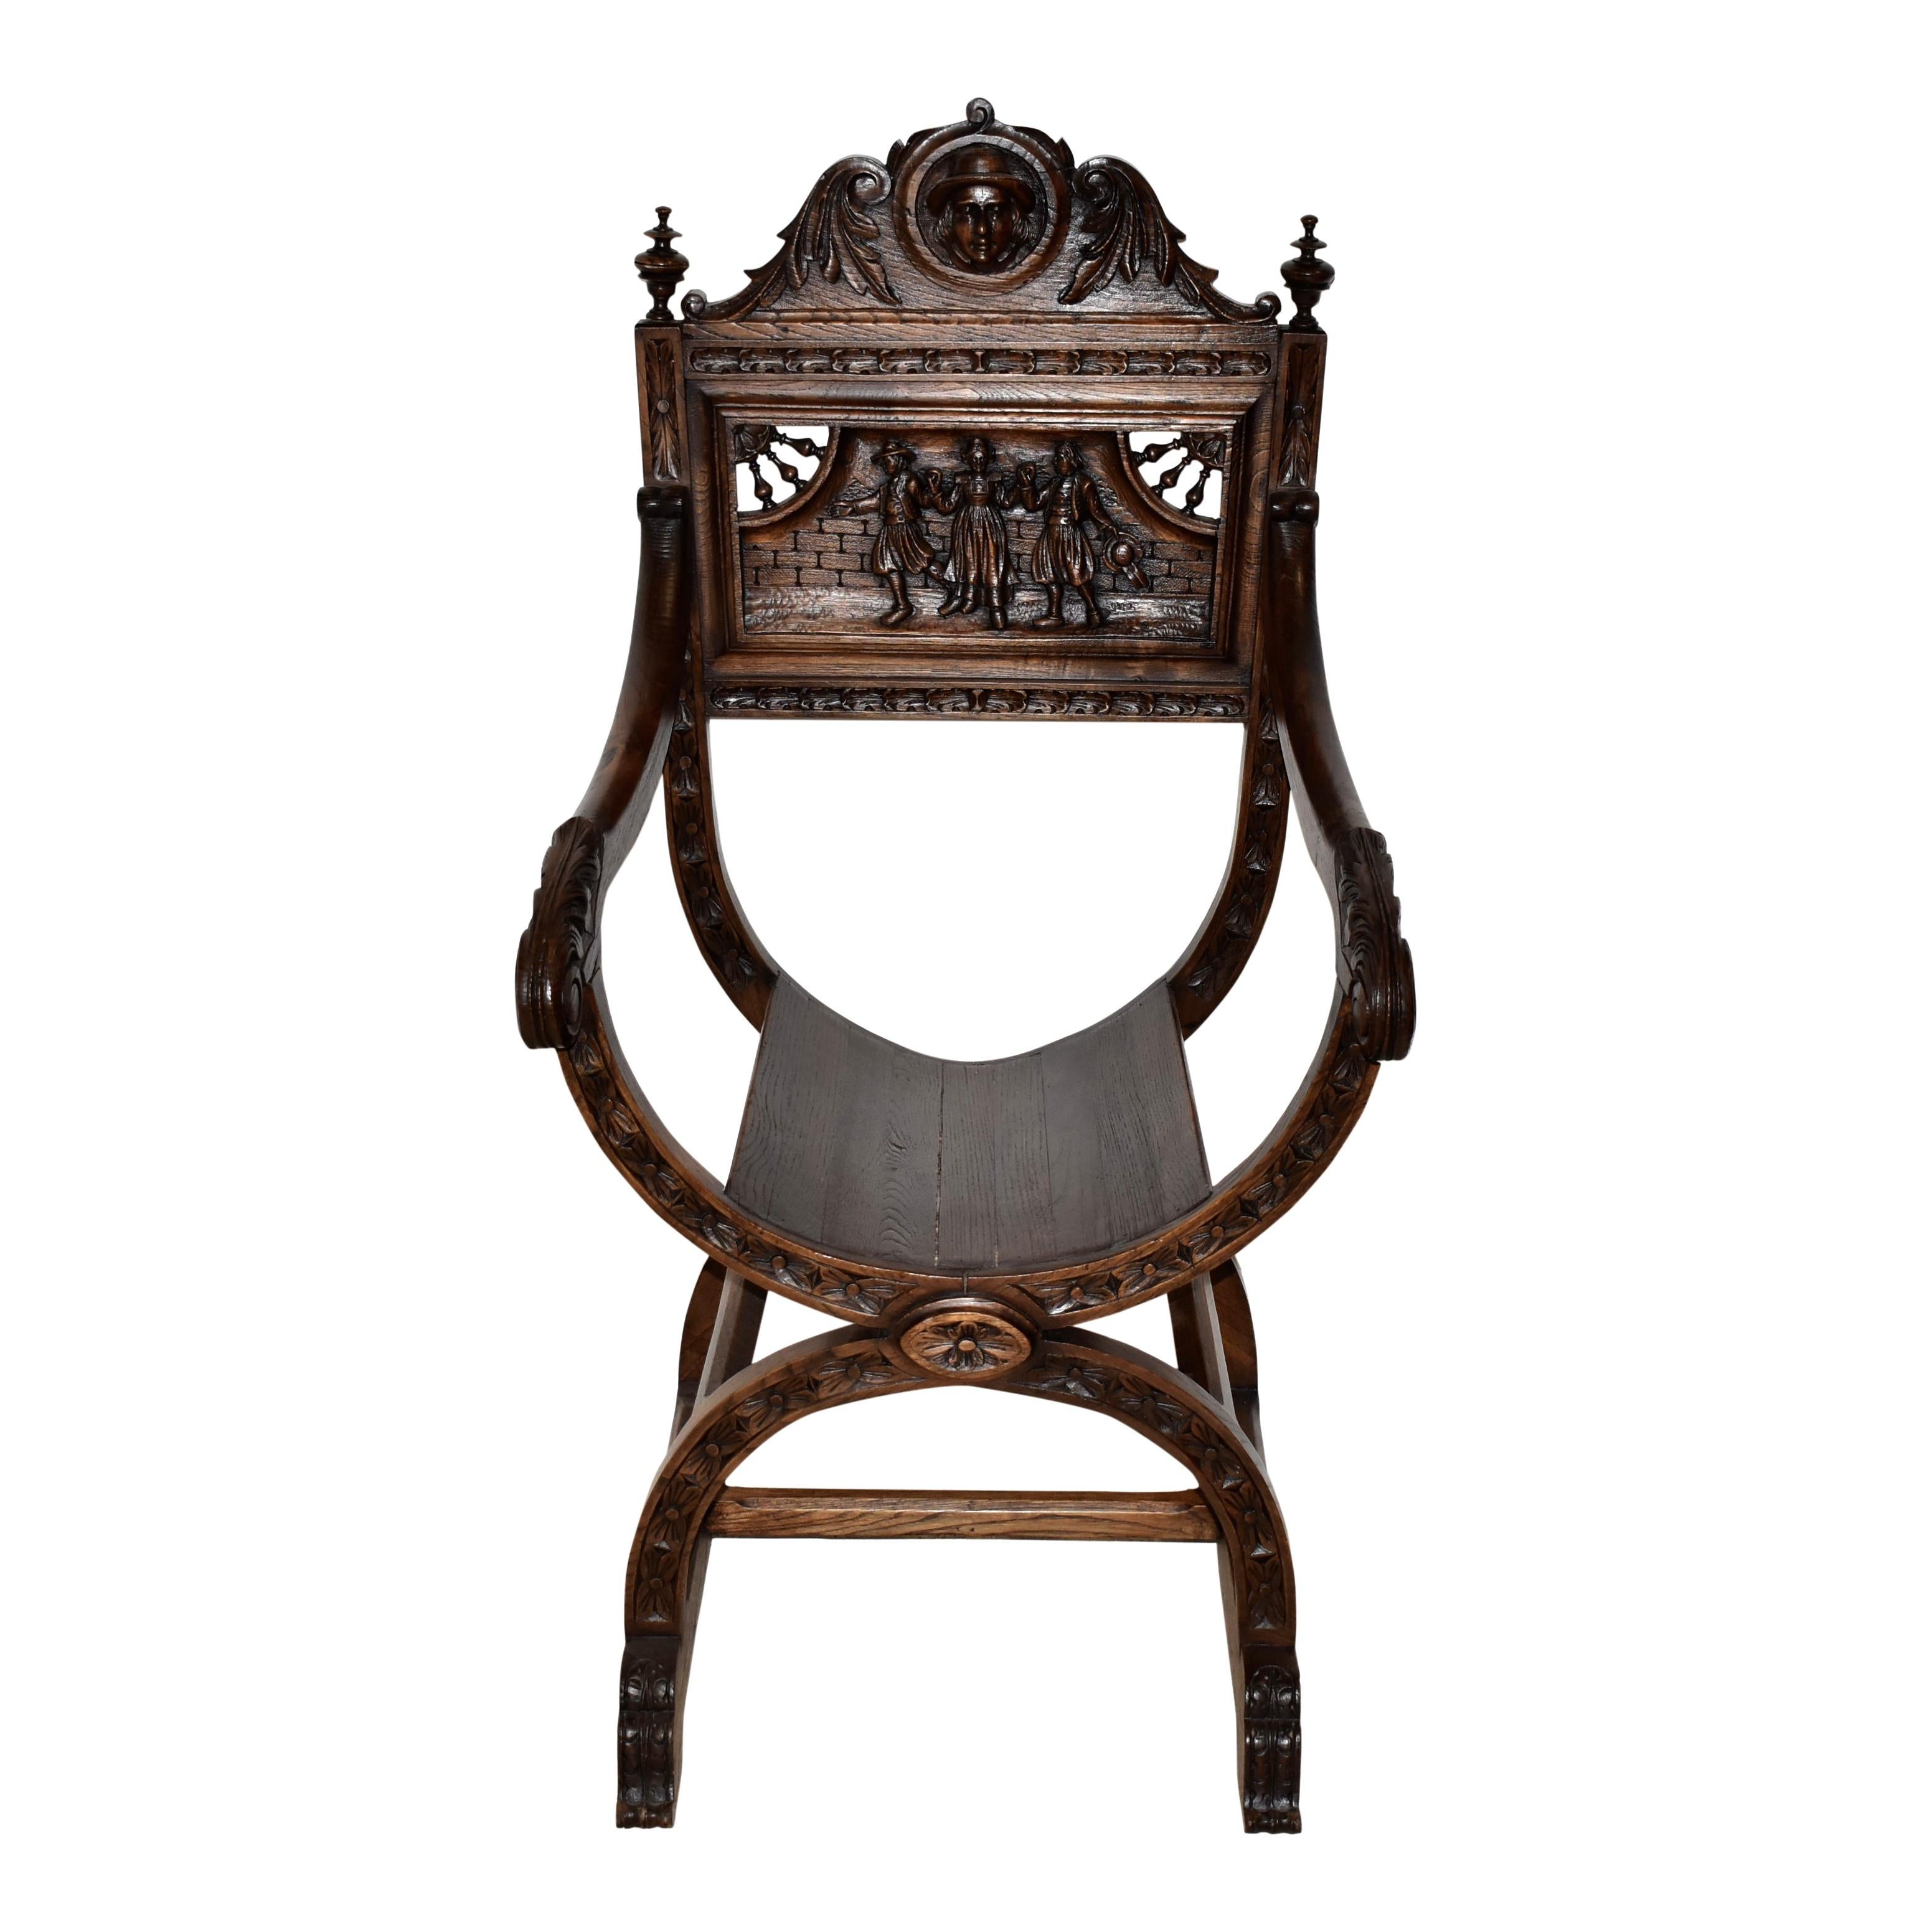 With a curule, throne like design and intricate Dutch carvings, this exquisite Dagobert style chair is a masterpiece. Crafted from oak and finished with a dark stain, the chair features a shaped cresting rail carved with a gentleman's face amid